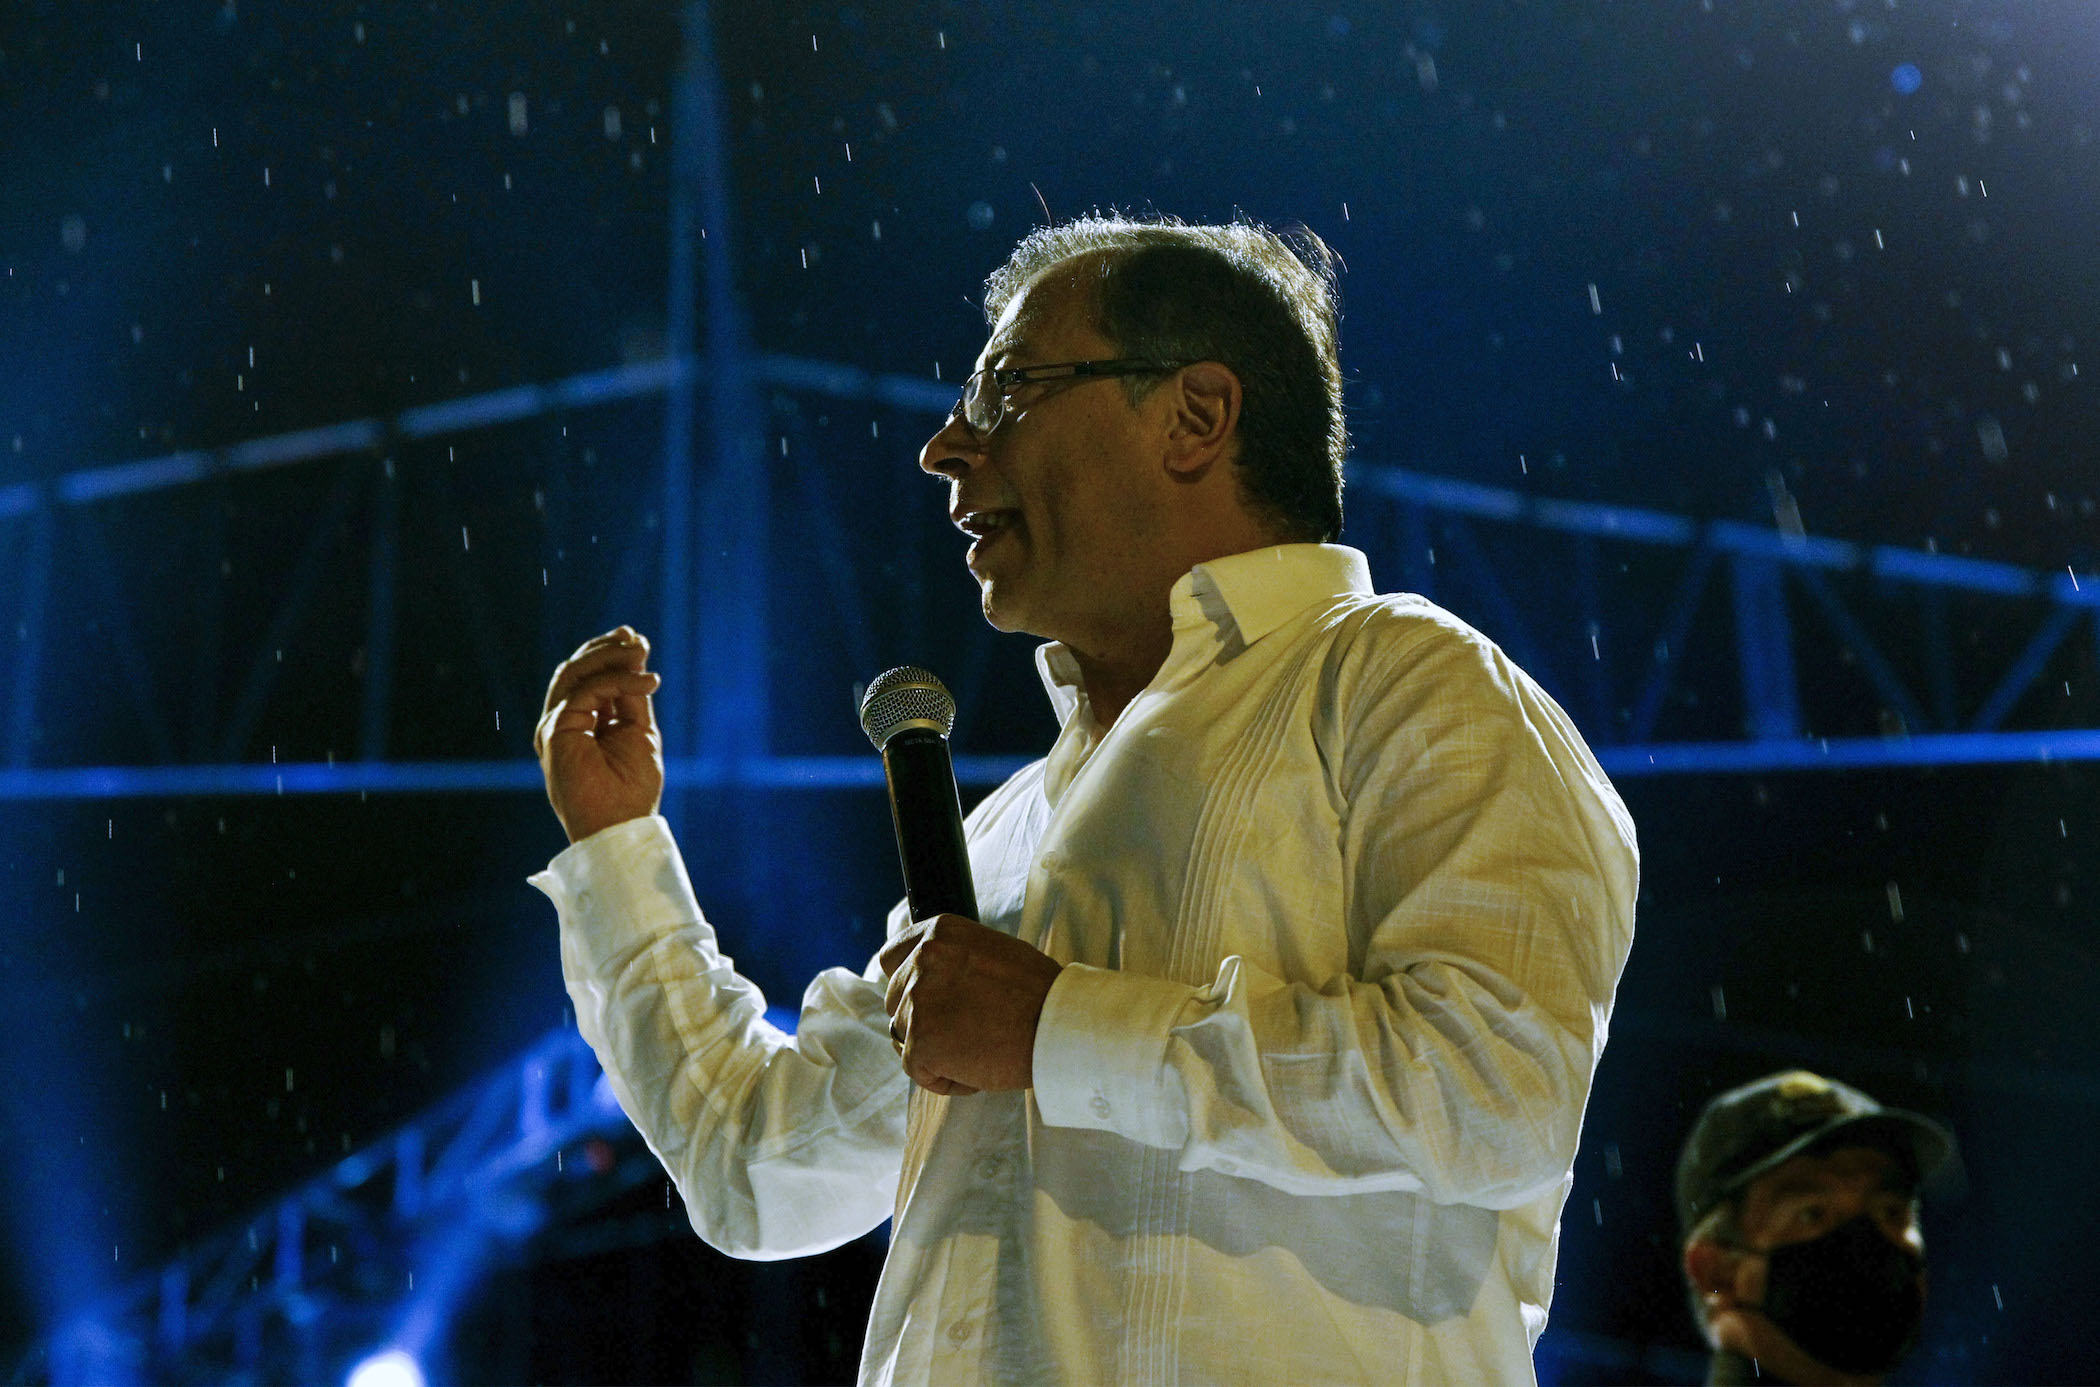 Colombian Senator and opposition leader Gustavo Petro delivers a speech during a campaign rally as a presidential pre-candidate on November 19, 2021 in Medellin, Colombia.